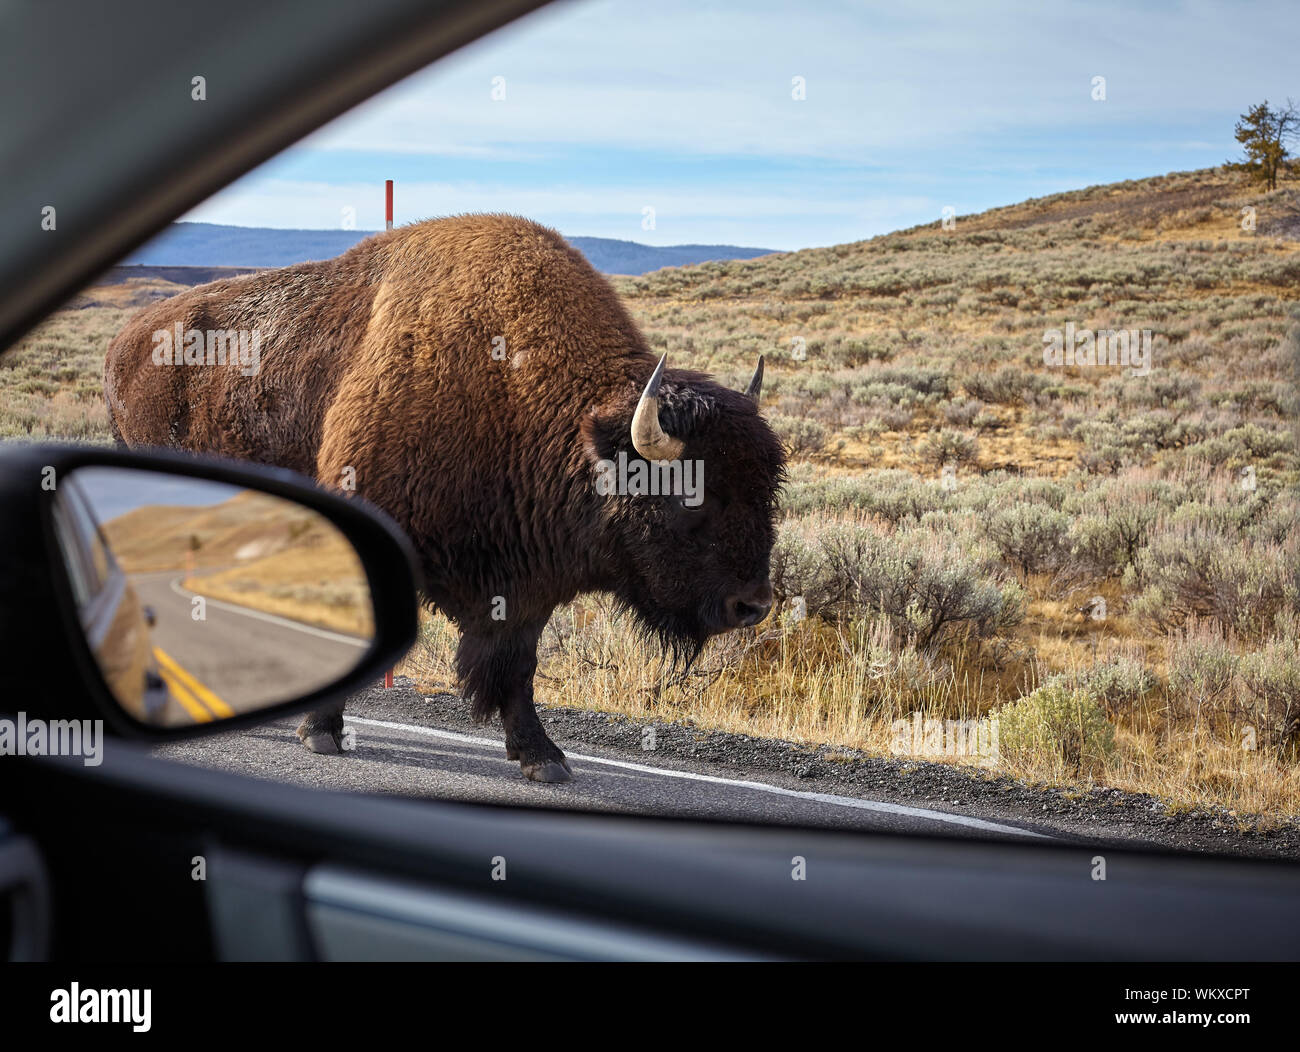 Encounter with an American bison (Bison bison) on a road seen from inside a car, Yellowstone National Park, Wyoming, USA. Stock Photo